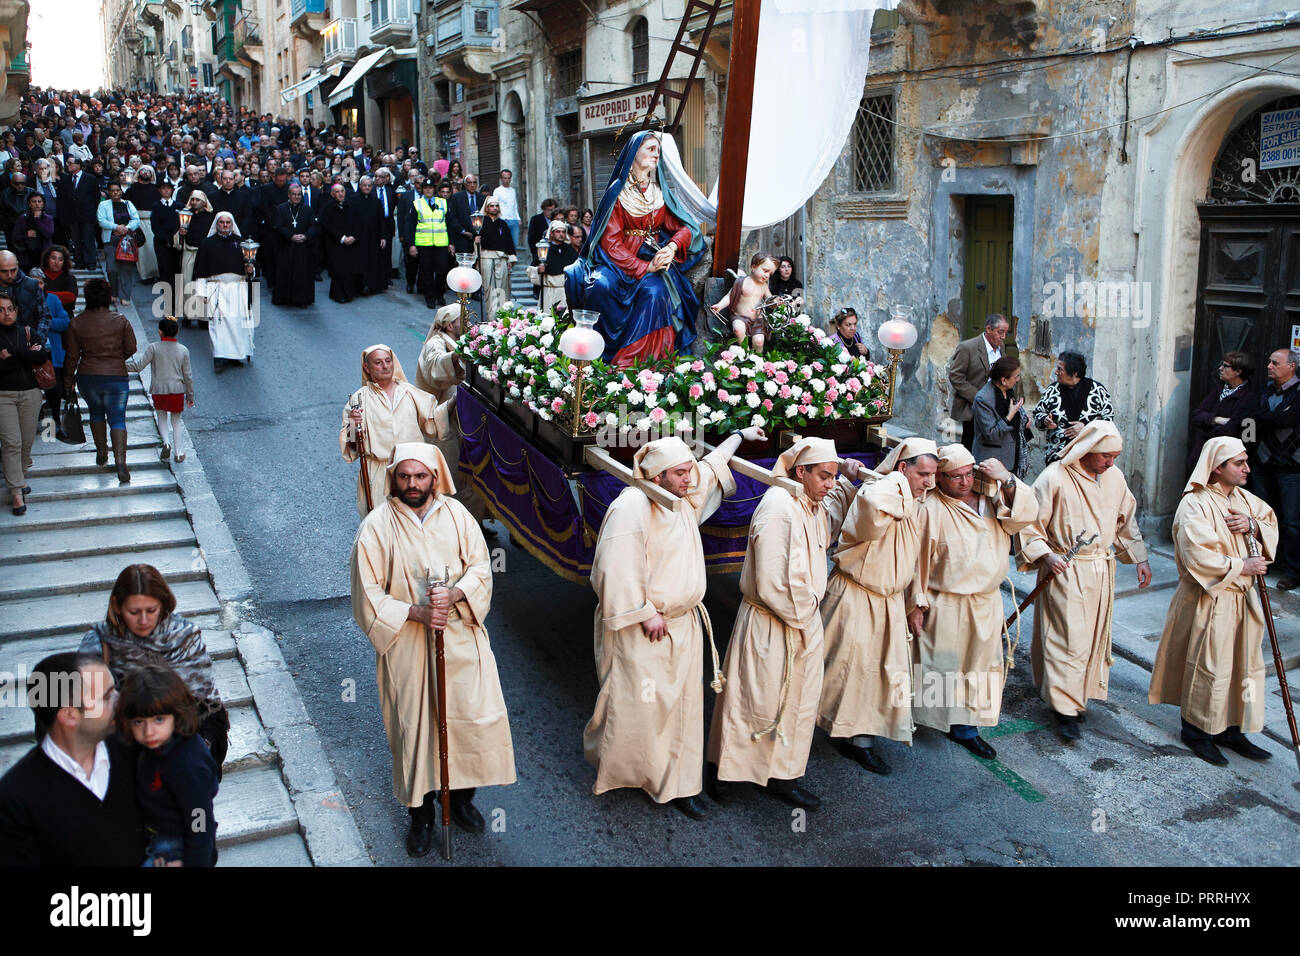 Good Friday Procession Our Lady of Sorrows, St. Paul Street, Old Town, Valletta, Malta Stock Photo